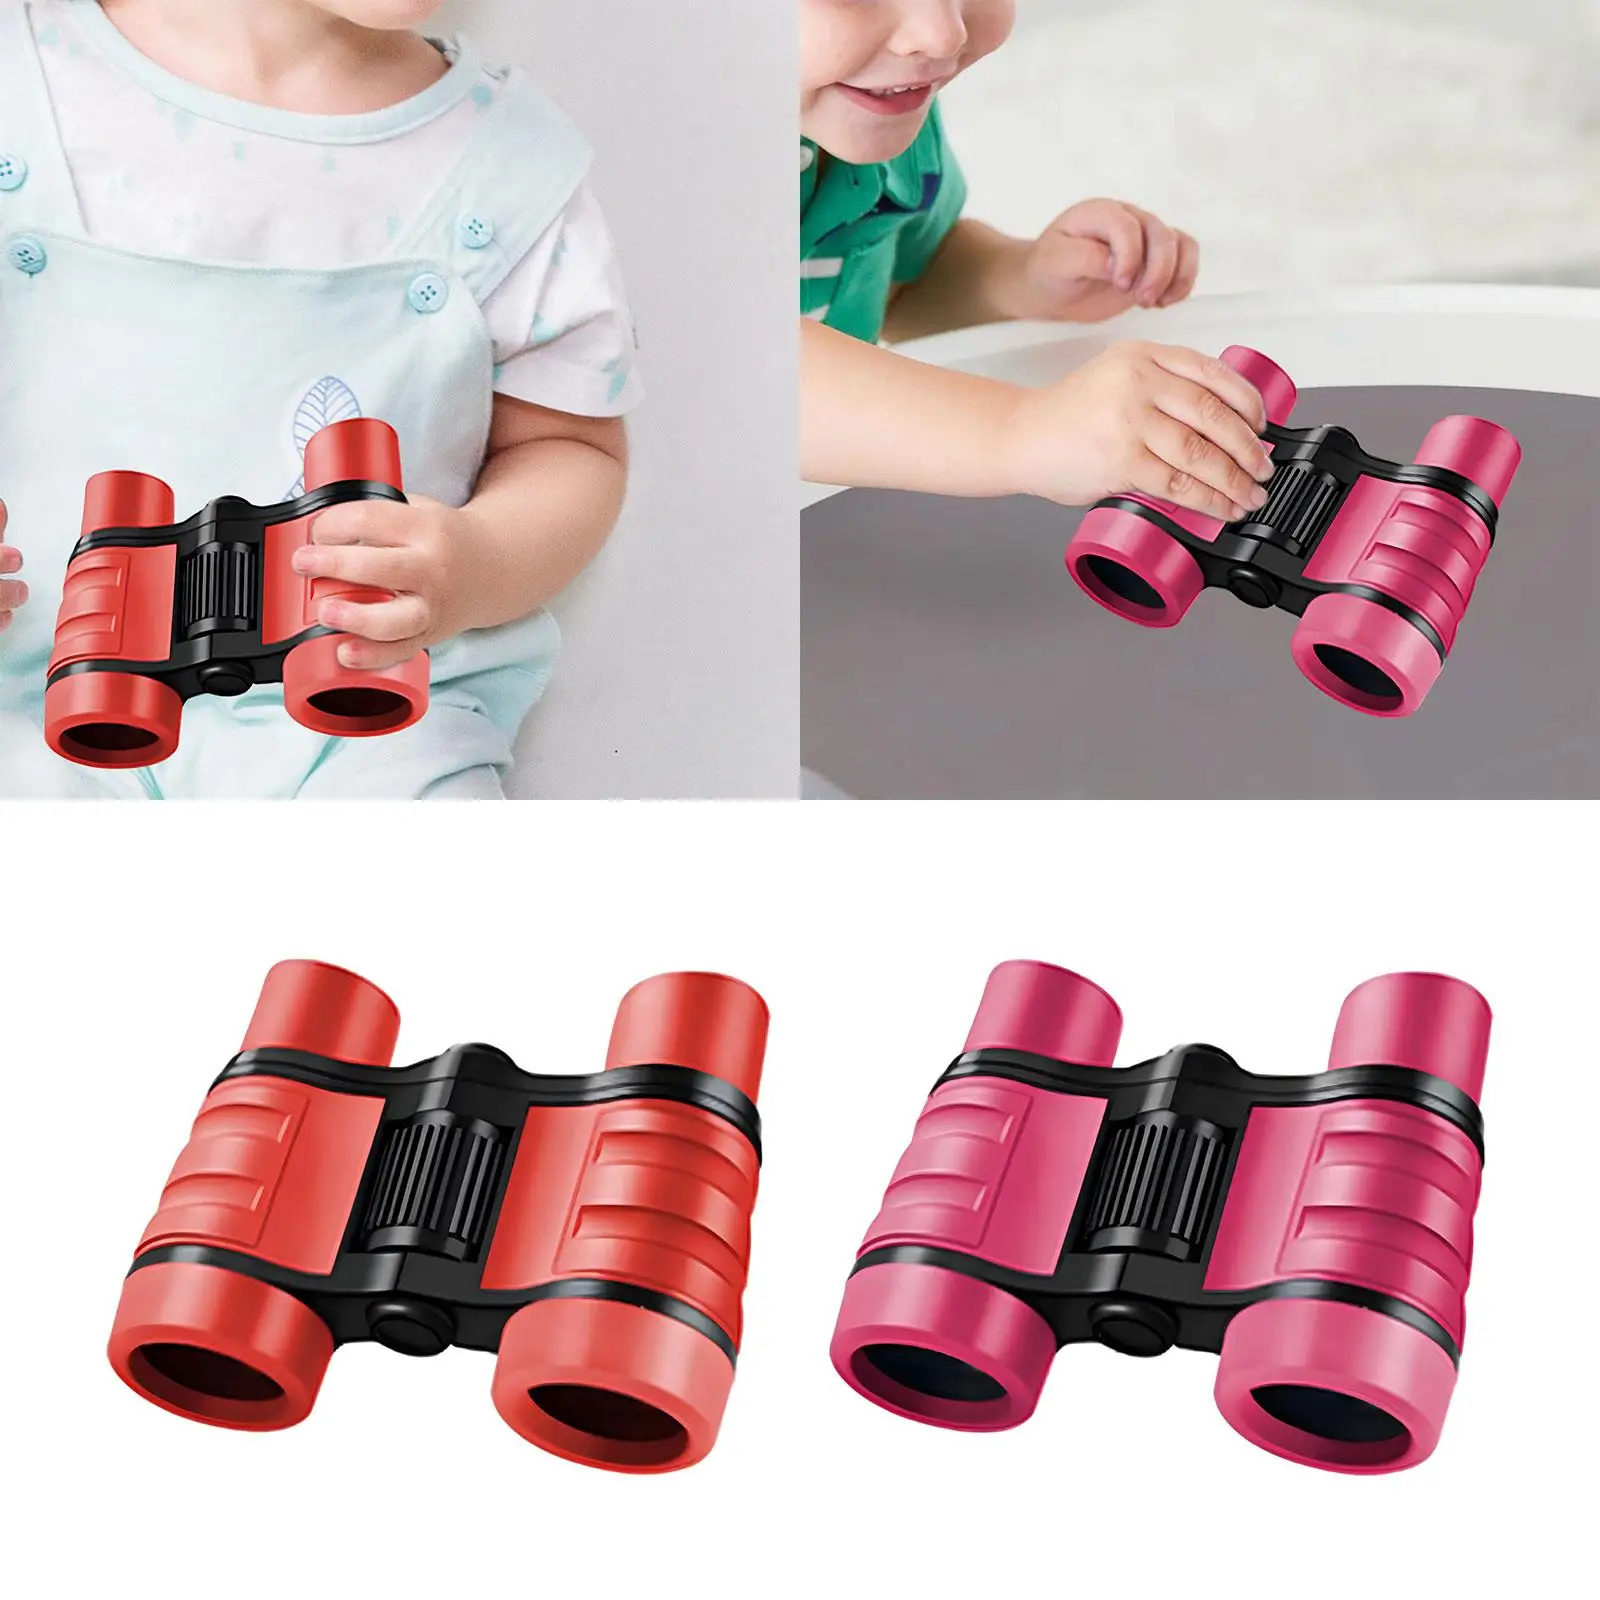 Kids Binoculars Toy 4x30 Jungle Binoculars Toy with Lanyard for Educational Learning Outdoor Toy Bird Watching Holiday Gift